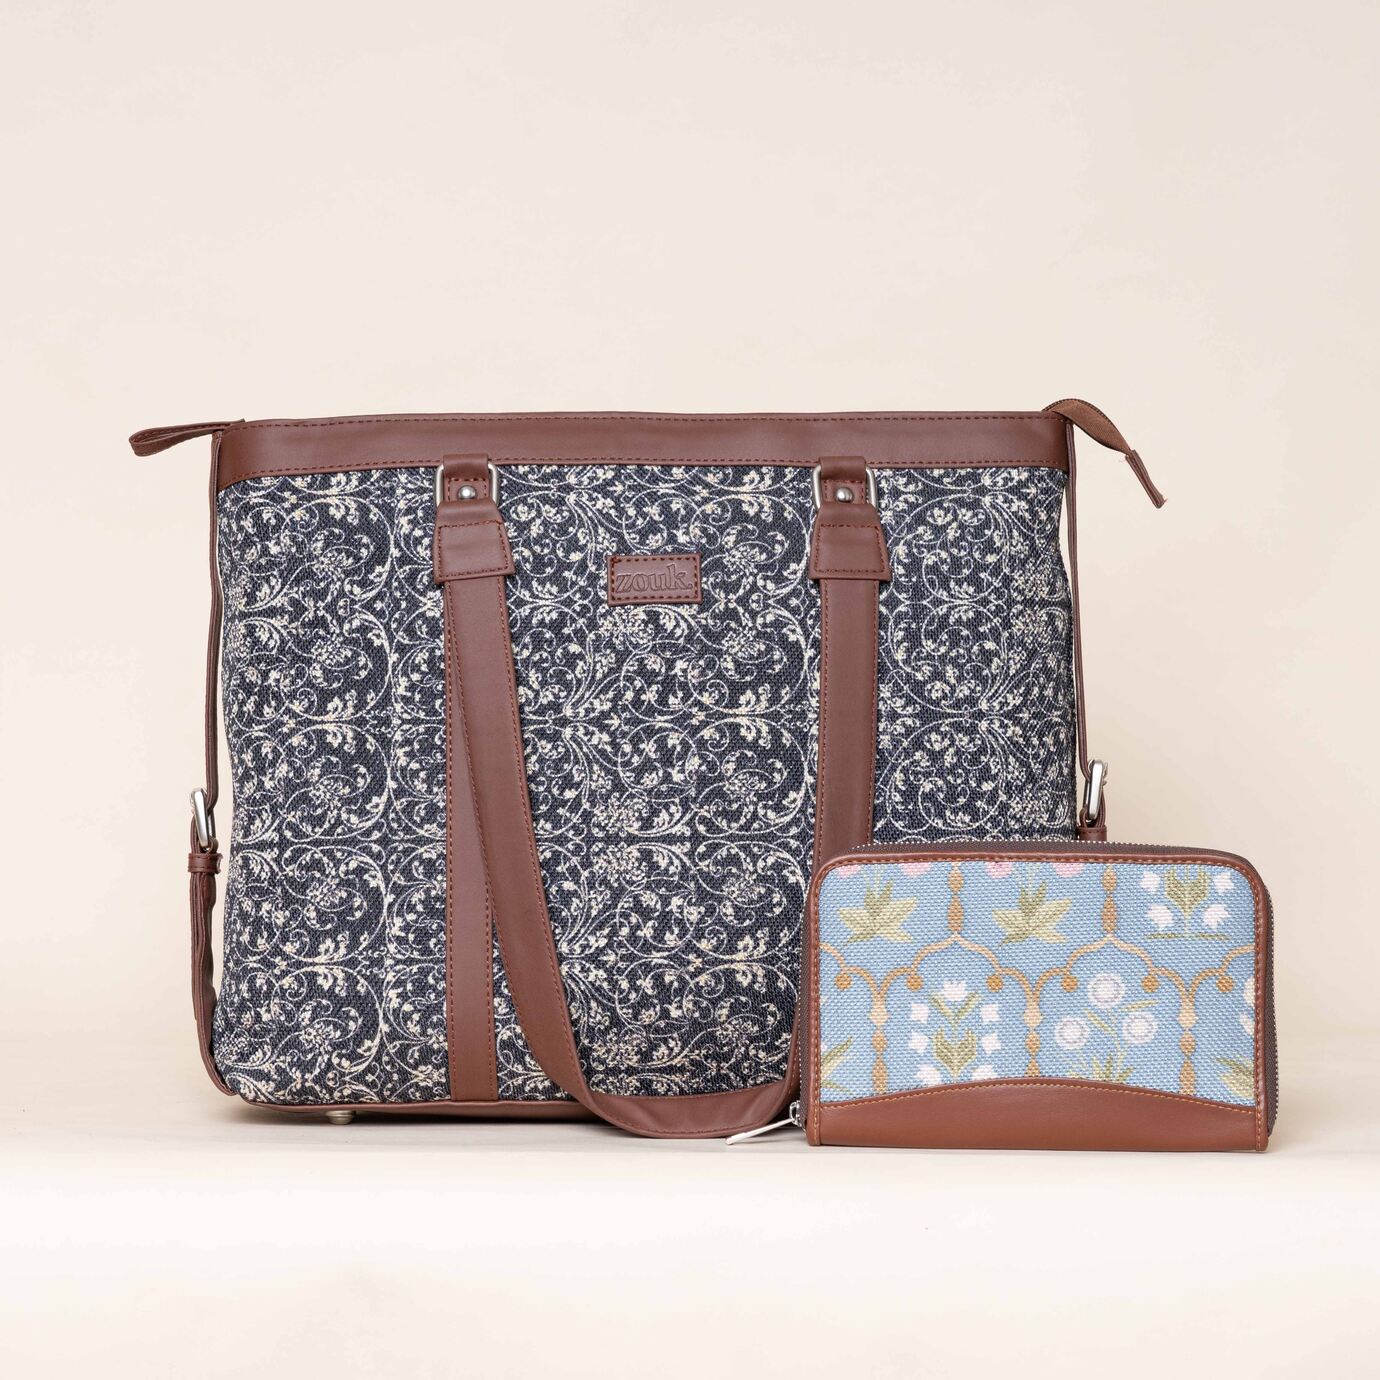 Lattice Lace and Jaipur Fresco - Office Bag & Chain Wallet Combo